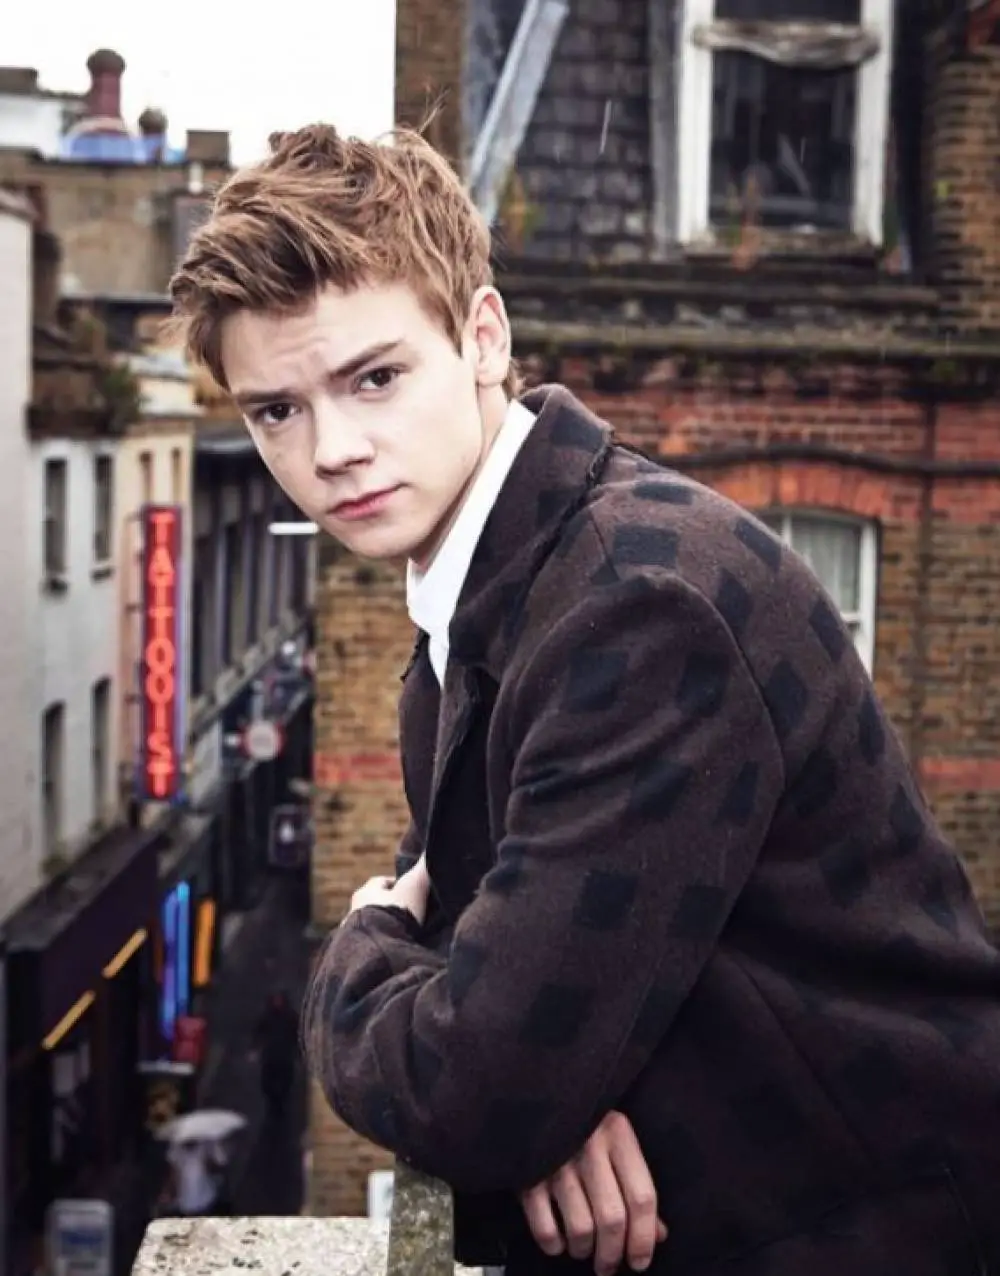 An Insight Into Thomas Brodie-Sangster’s Career